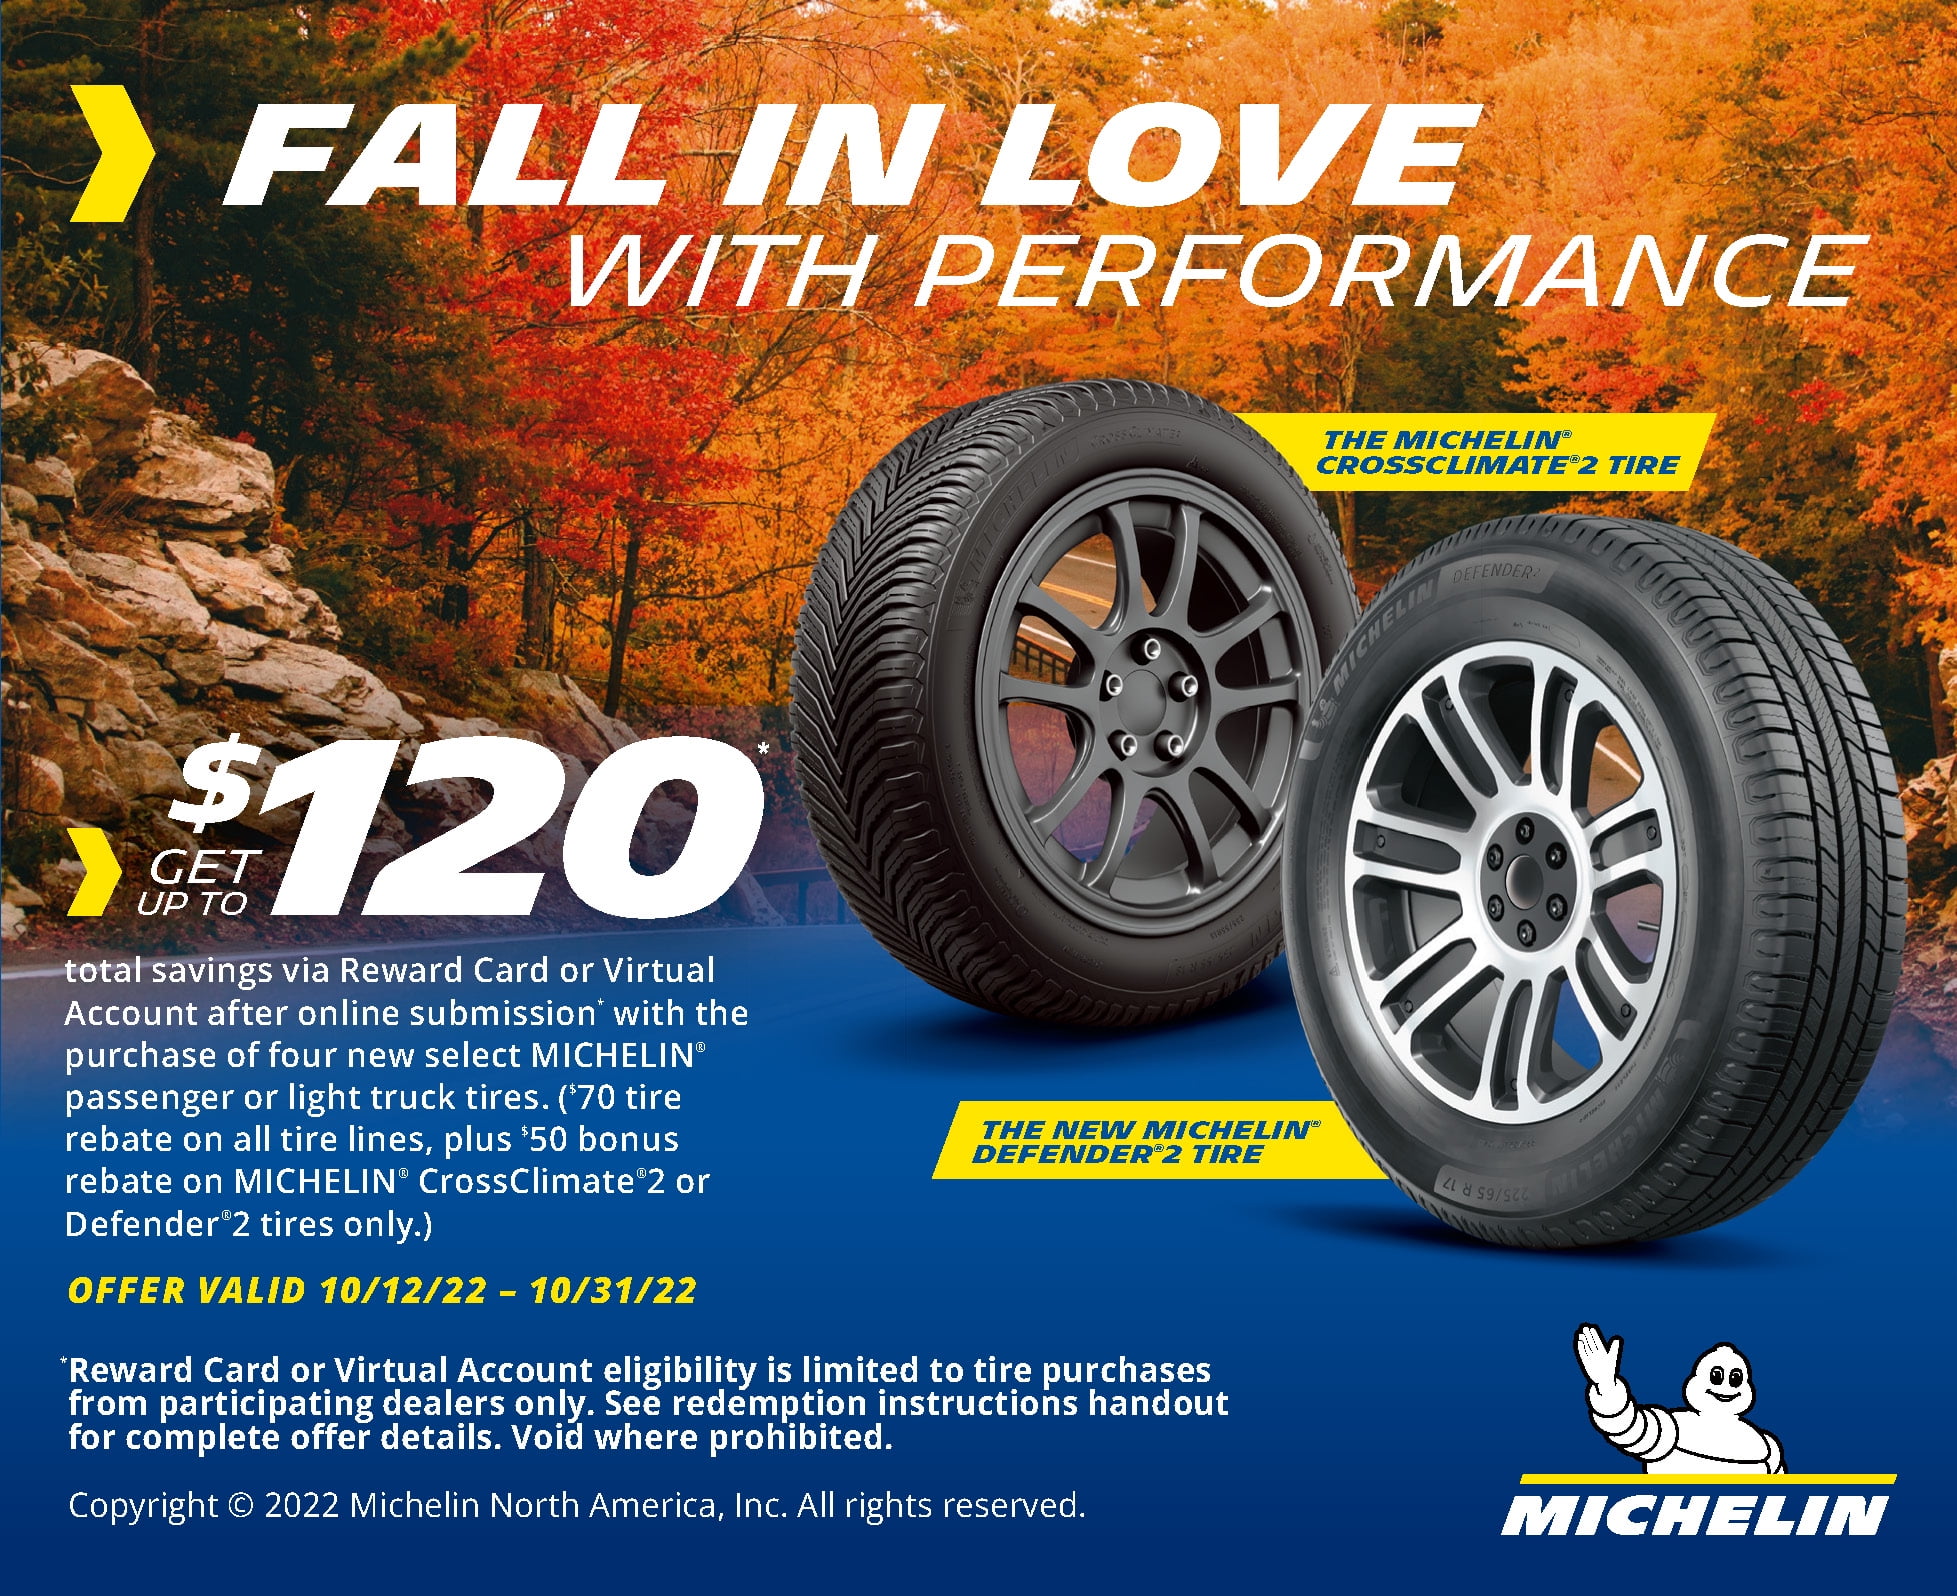 Michelin Primacy 4 ST 225/50R17 98V XL Fits: 2012-15 Chevrolet Cruze LT,  2012-18 Ford Focus Electric 